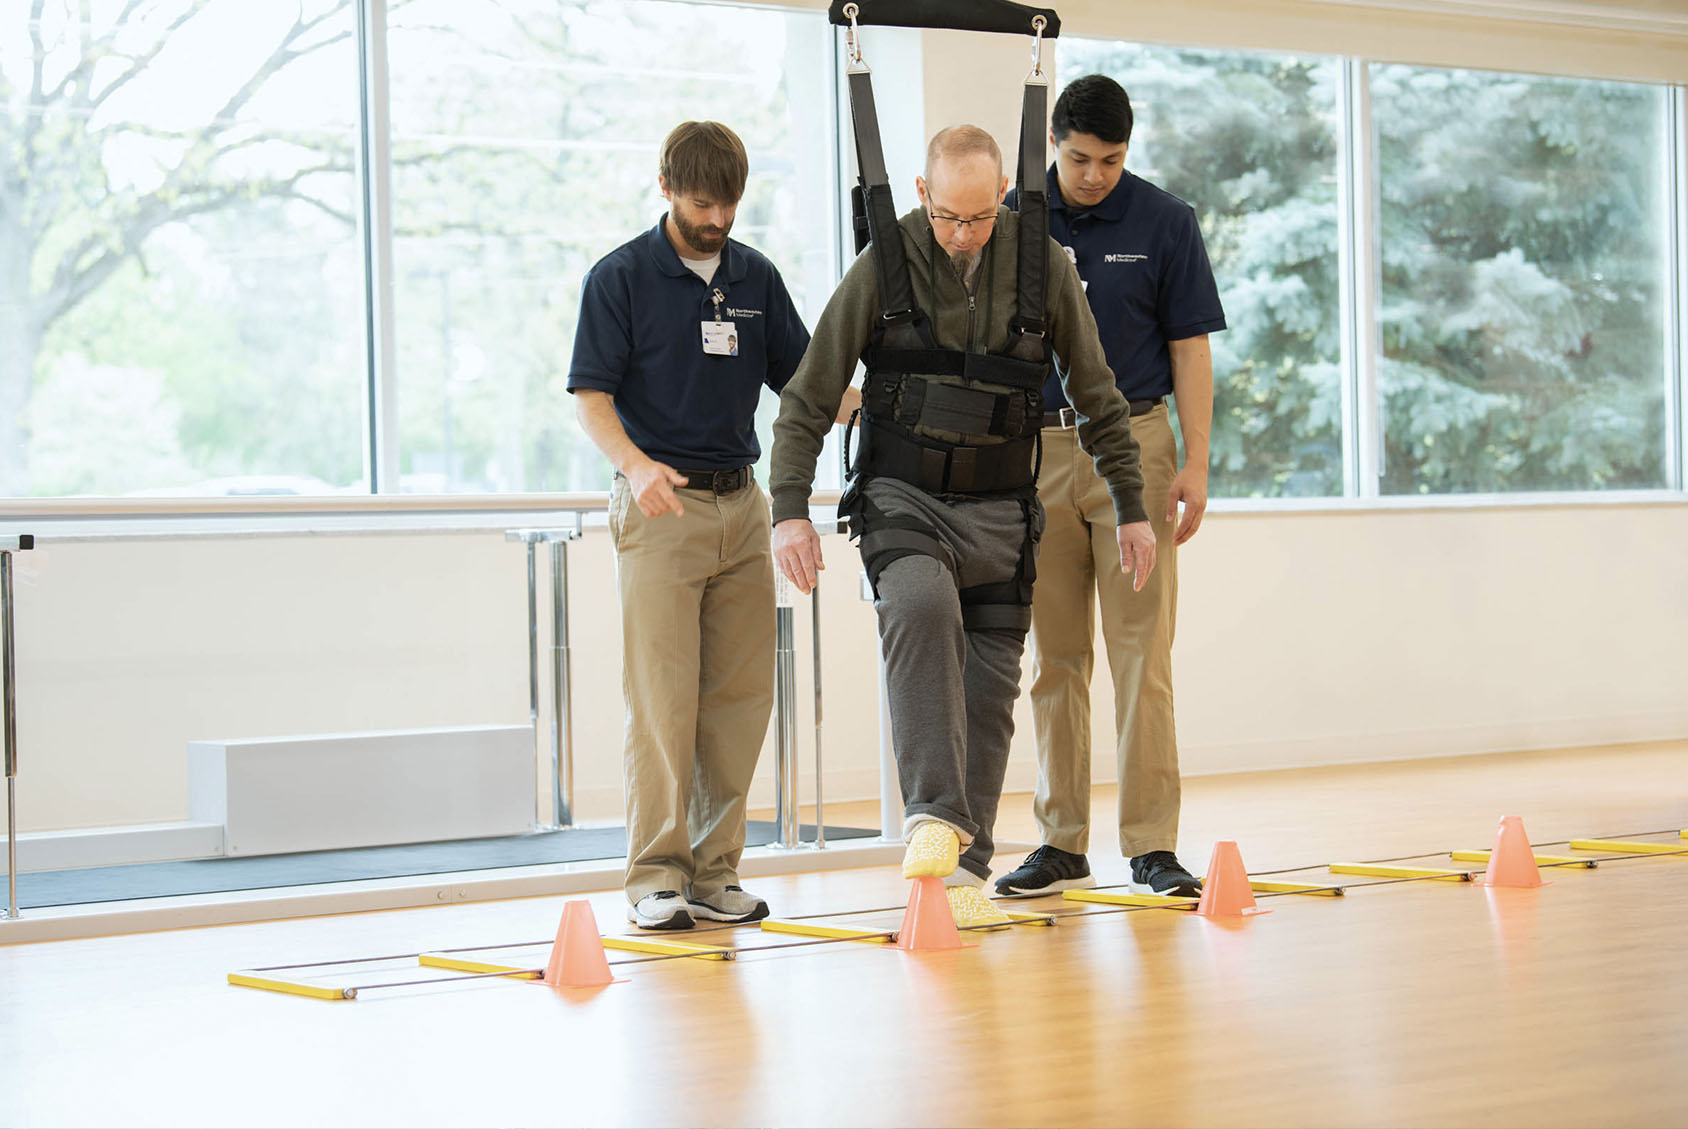 Clinicians helping patient to walk using assistive device suspended from ceiling.